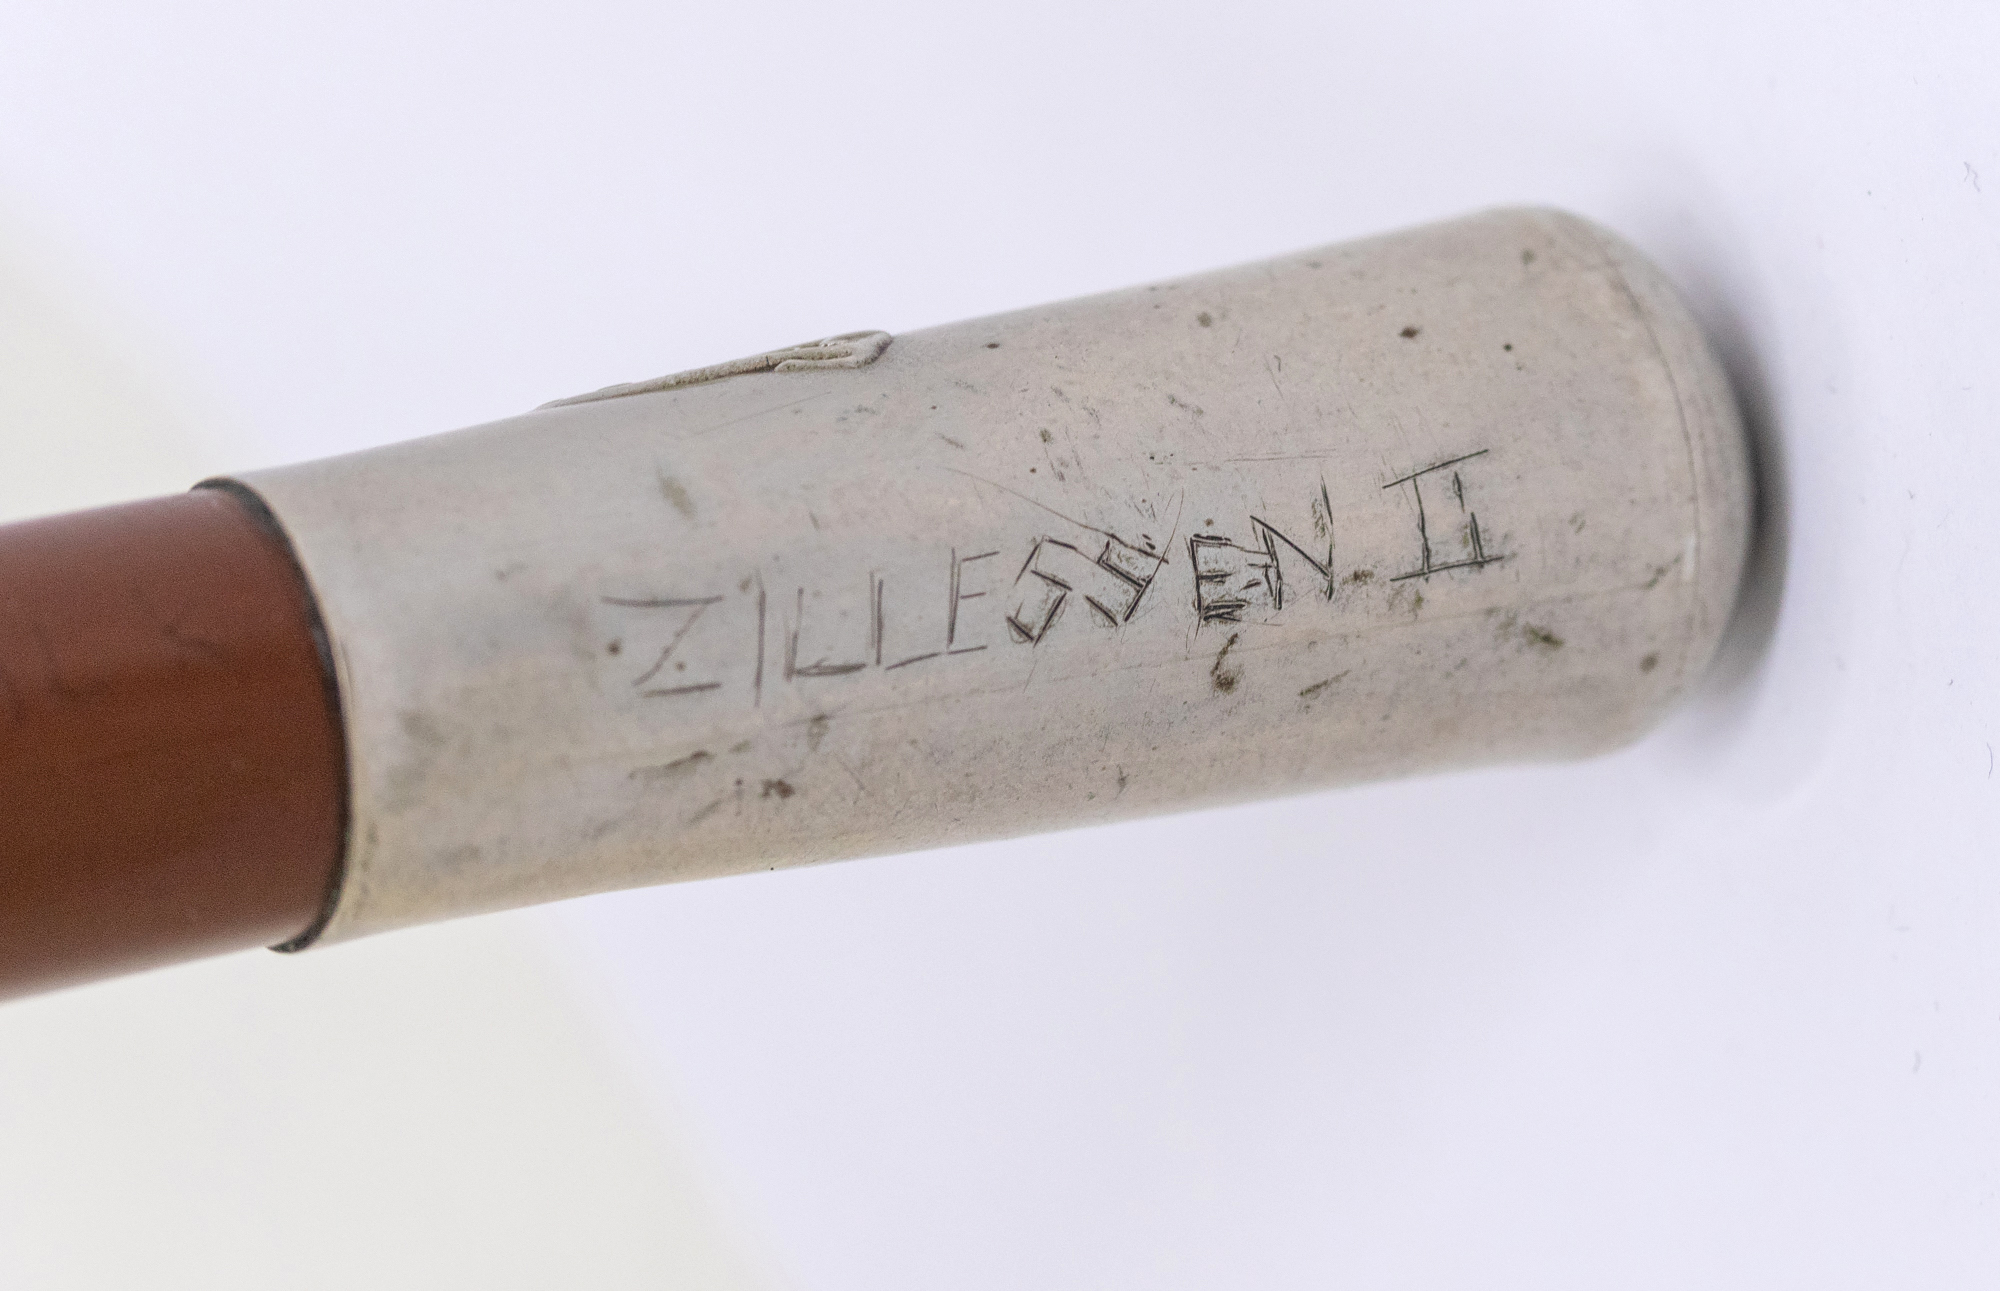 Zillessen's name etched into his swagger stick